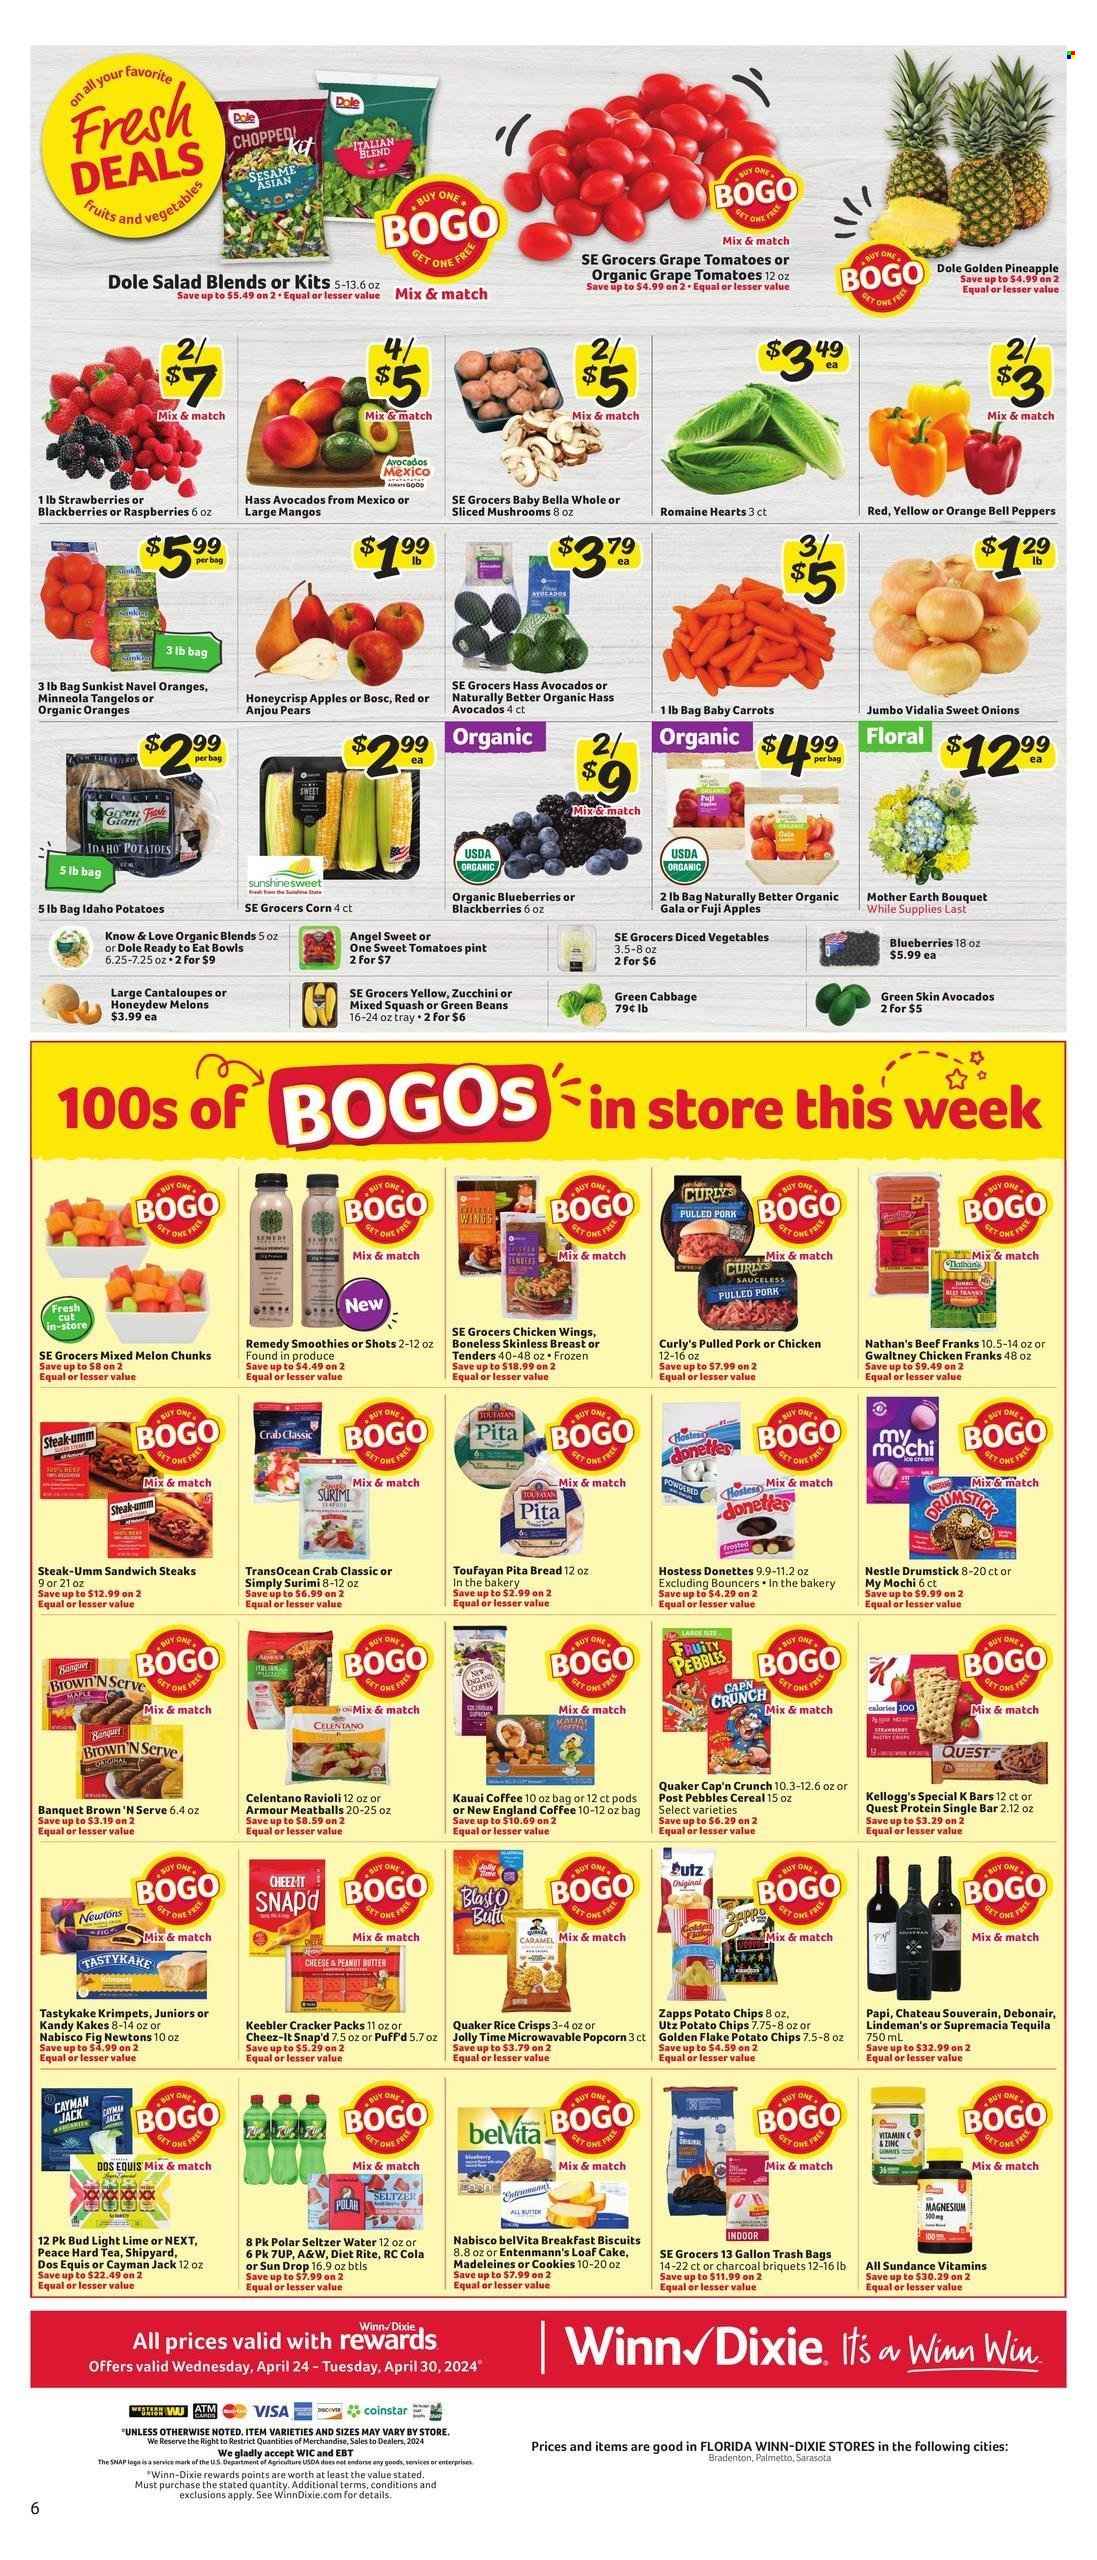 thumbnail - Winn Dixie Flyer - 04/24/2024 - 04/30/2024 - Sales products - melons, diced fruit, potato chips, chips, salad greens, salad, Dole, chicken wings, smoothie, bread, pita, chicken frankfurters, frankfurters, Brown 'N Serve, sausage, donut, dessert, ice cream, ice cones, Nestlé, ravioli, meatballs, ready meal, coffee, Quaker, cereals, Cap'n Crunch, crackers, Keebler, Cheez-It, salty snack, snack bar, Kellogg's, breakfast bar, bars, tomatoes, bag, trash bags, wine, tequila, soft drink, 7UP, seltzer water, water, carbonated soft drink, tea, beer, Bud Light, Dos Equis, dietary supplement, vitamins, pulled pork, pulled chicken, blackberries, raspberries, strawberries, tangelos, oranges, navel oranges, apples, pears, crab, crab sticks, romaine hearts, Gala, Fuji apple, bell peppers, peppers, red peppers, blueberries, cabbage, cantaloupe, honeydew, pineapple, avocado, mango, carrots, beans, green beans, zucchini, onion, mushrooms, baby bella mushrooms, corn, Mother Earth, potatoes, Nabisco, popcorn, rice crisps, crisps, cake, sweet bread, loaf cake, Entenmann's, biscuit, belVita, diced vegetables. Page 9.